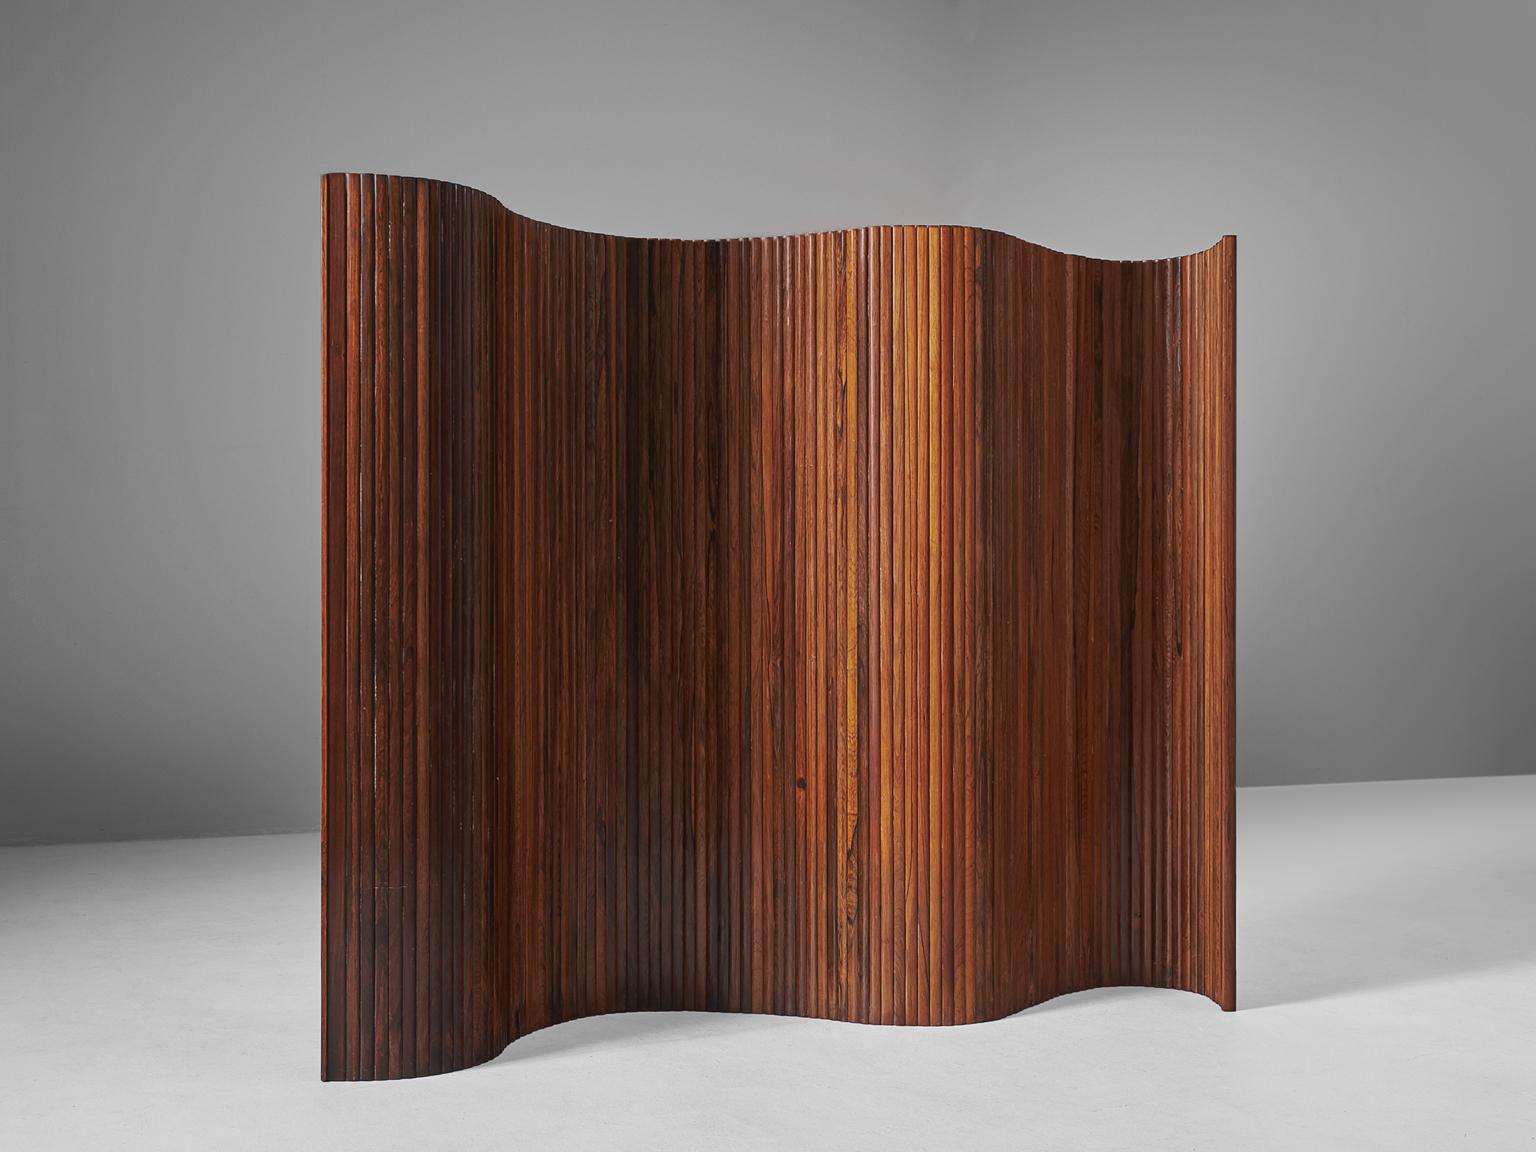 Beautifully shaped roll-able and versatile room divider made of vertically narrow solid rosewood slets. This tambour 'wave' formed screen could easily fit in every interior. Can be shaped in numerous ways and is in perfect condition.

In style